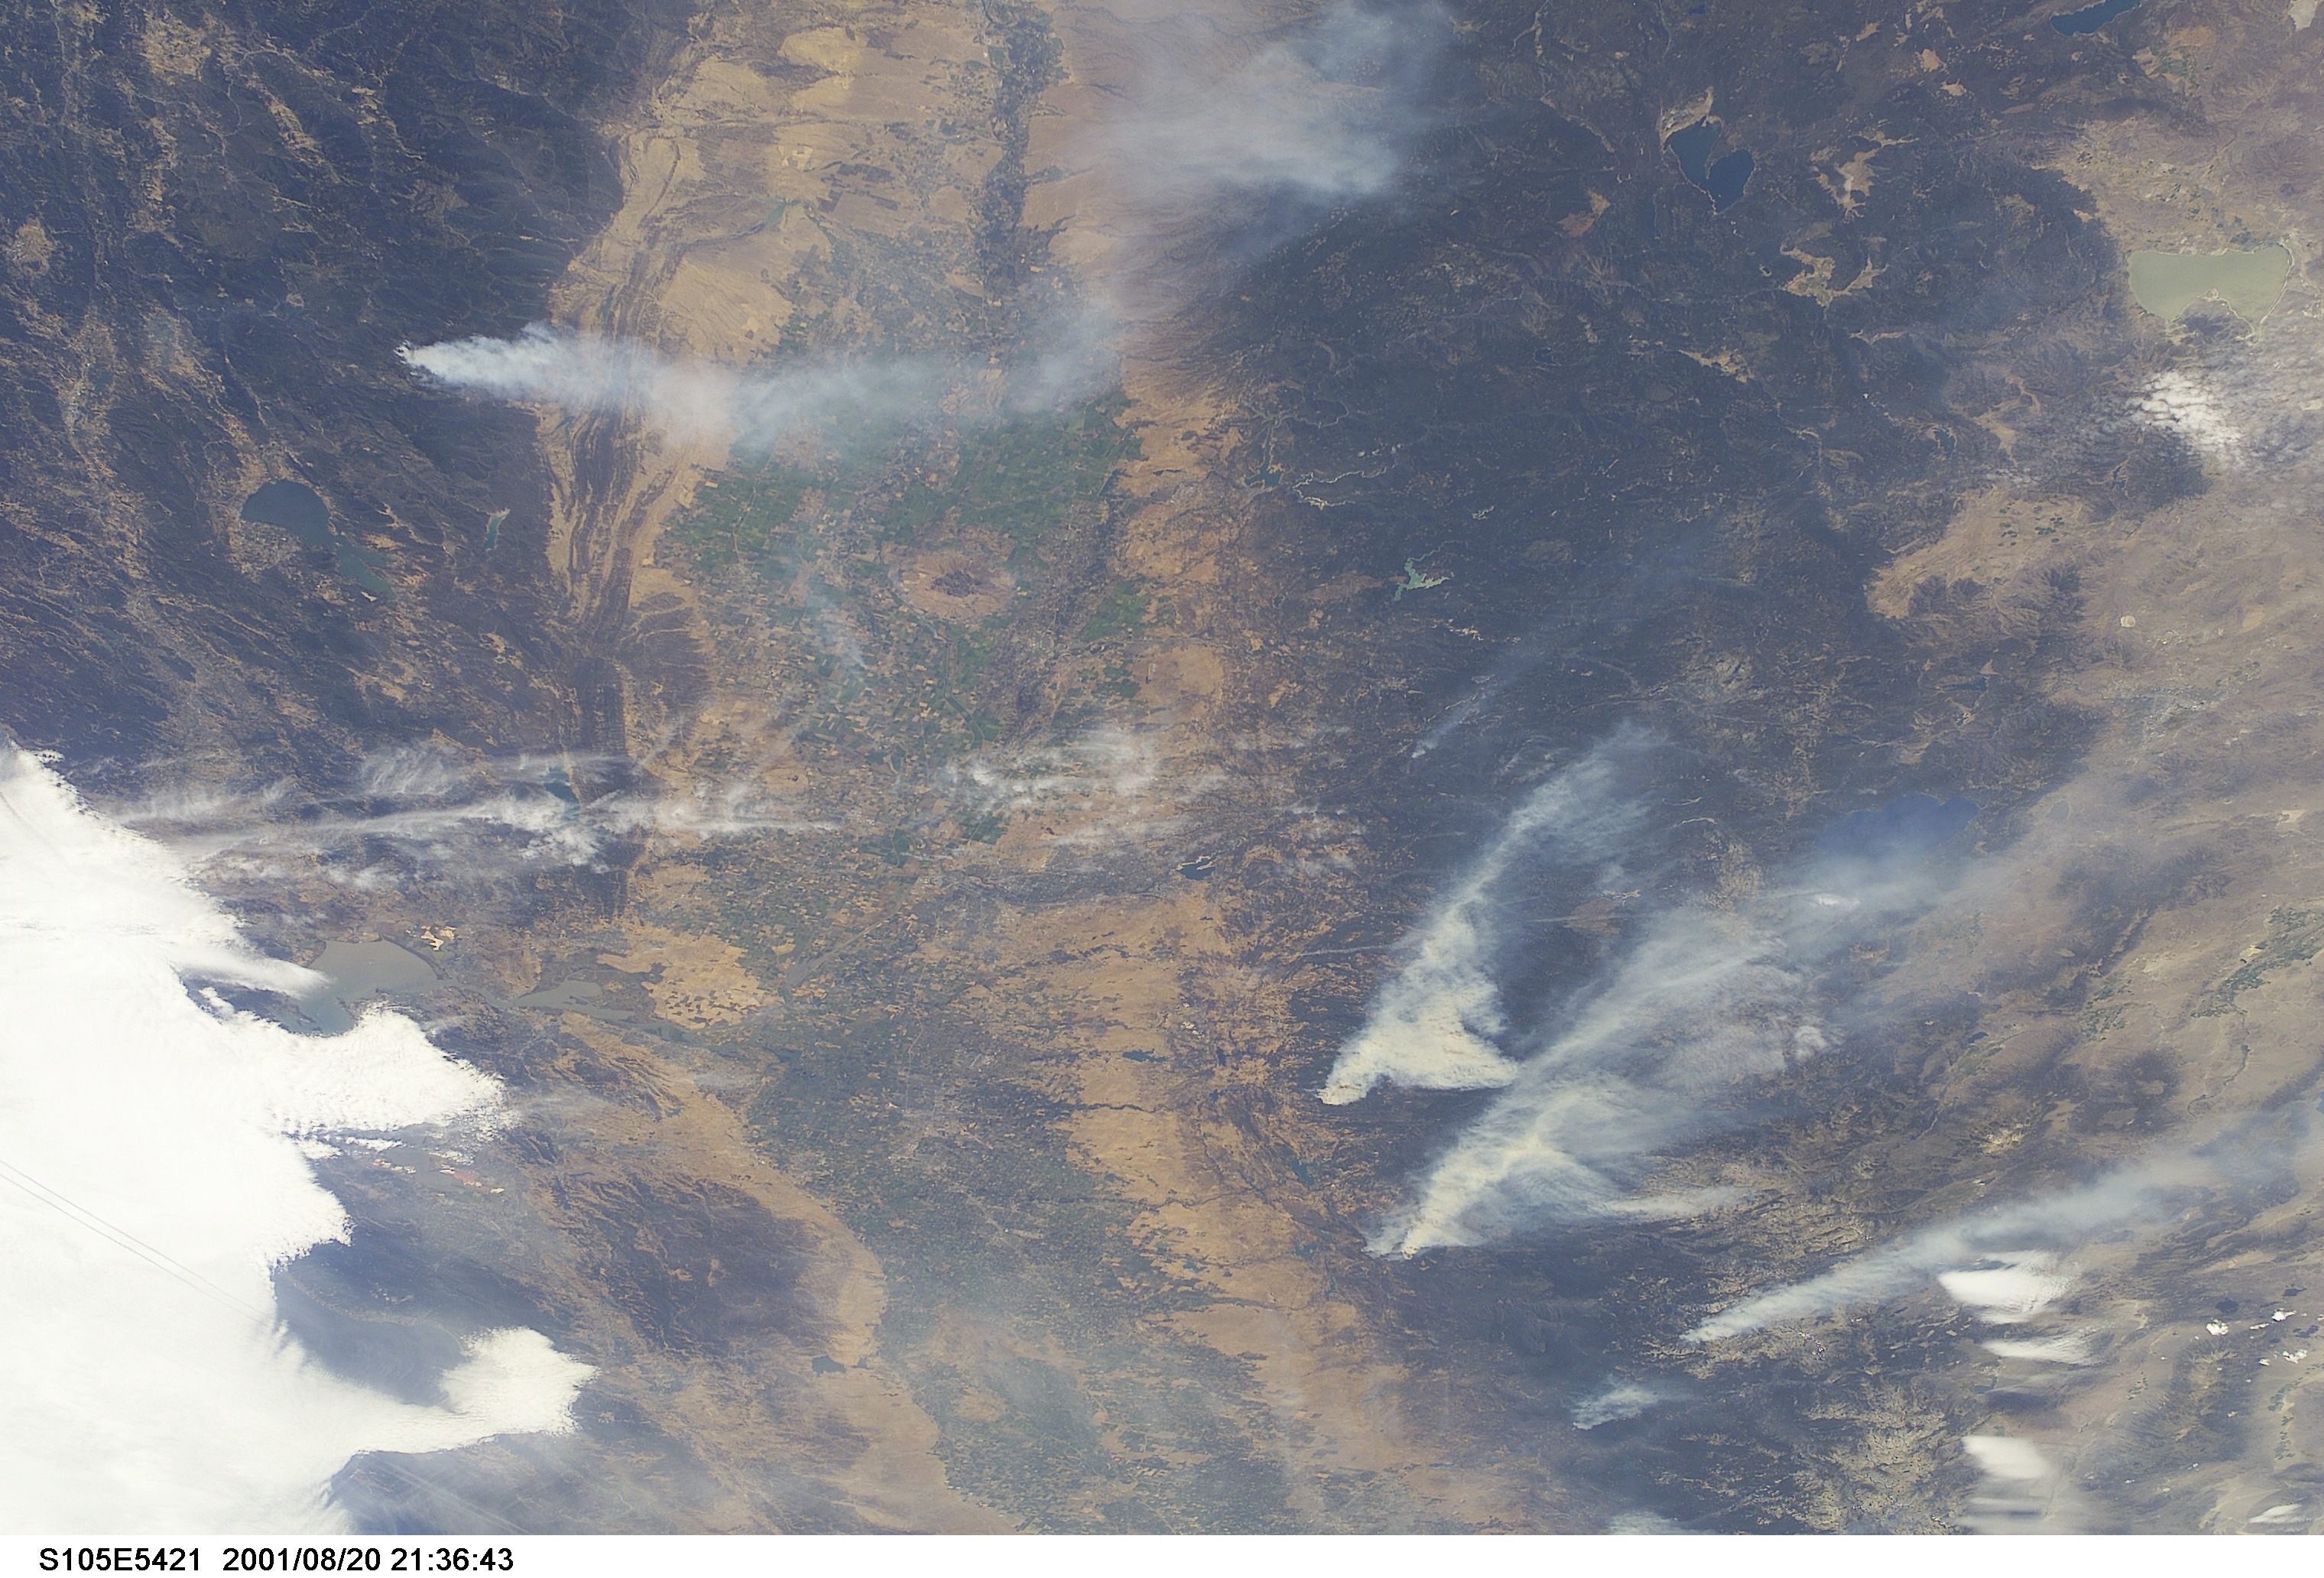 California Wildfires as Seen From the Space Shuttle - related image preview